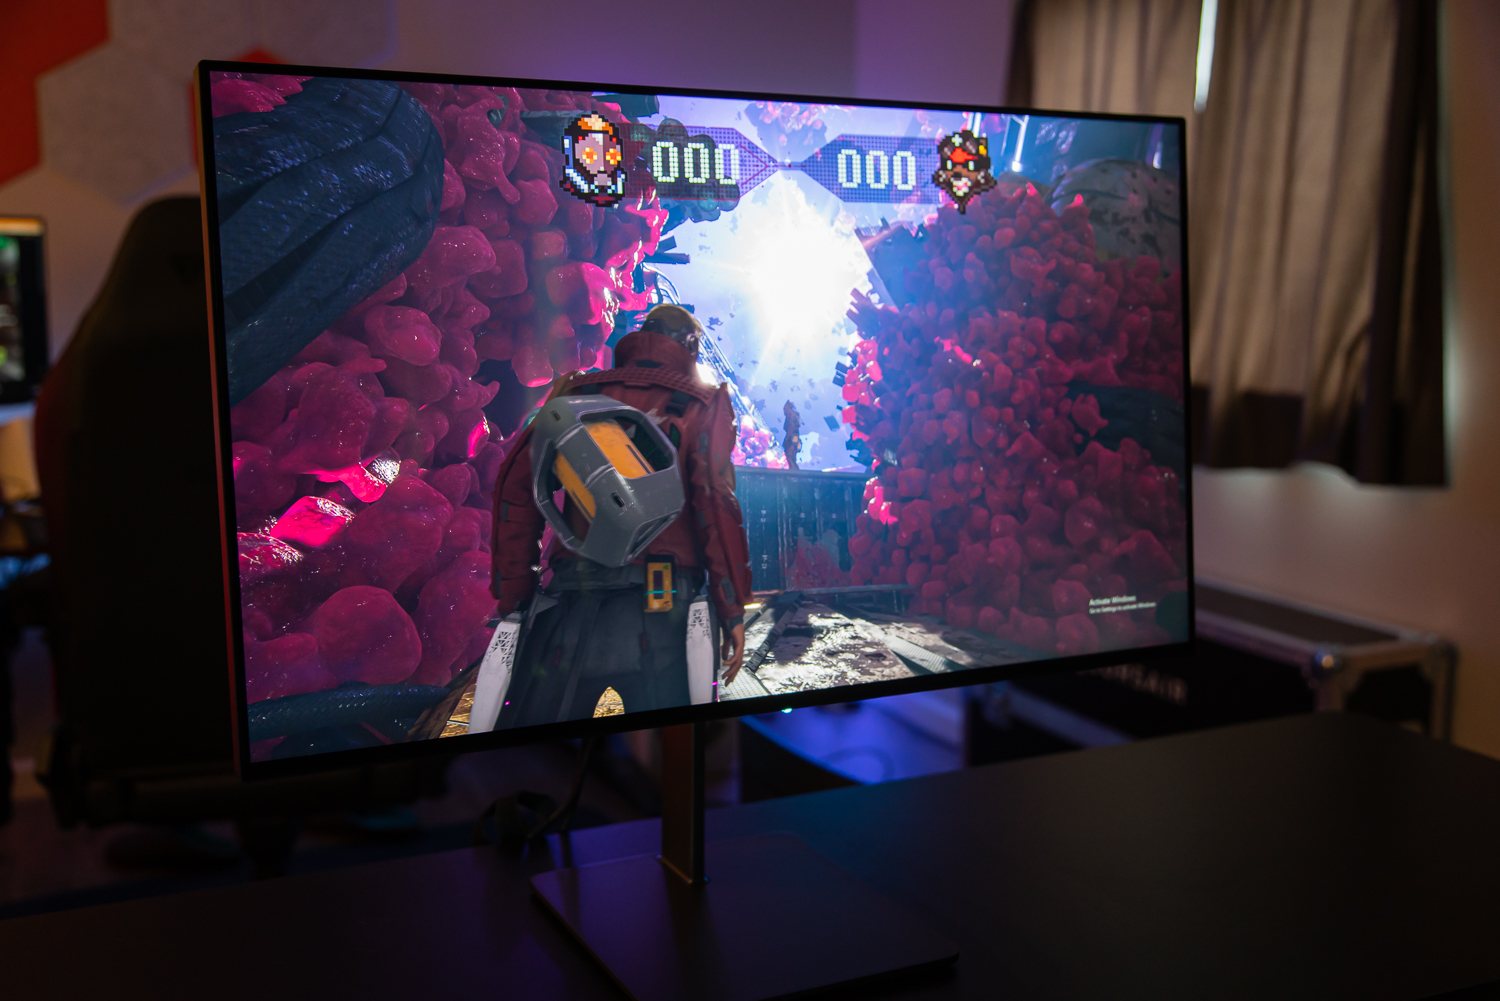 The Spectrum 4K Glossy made me ditch matte gaming monitors